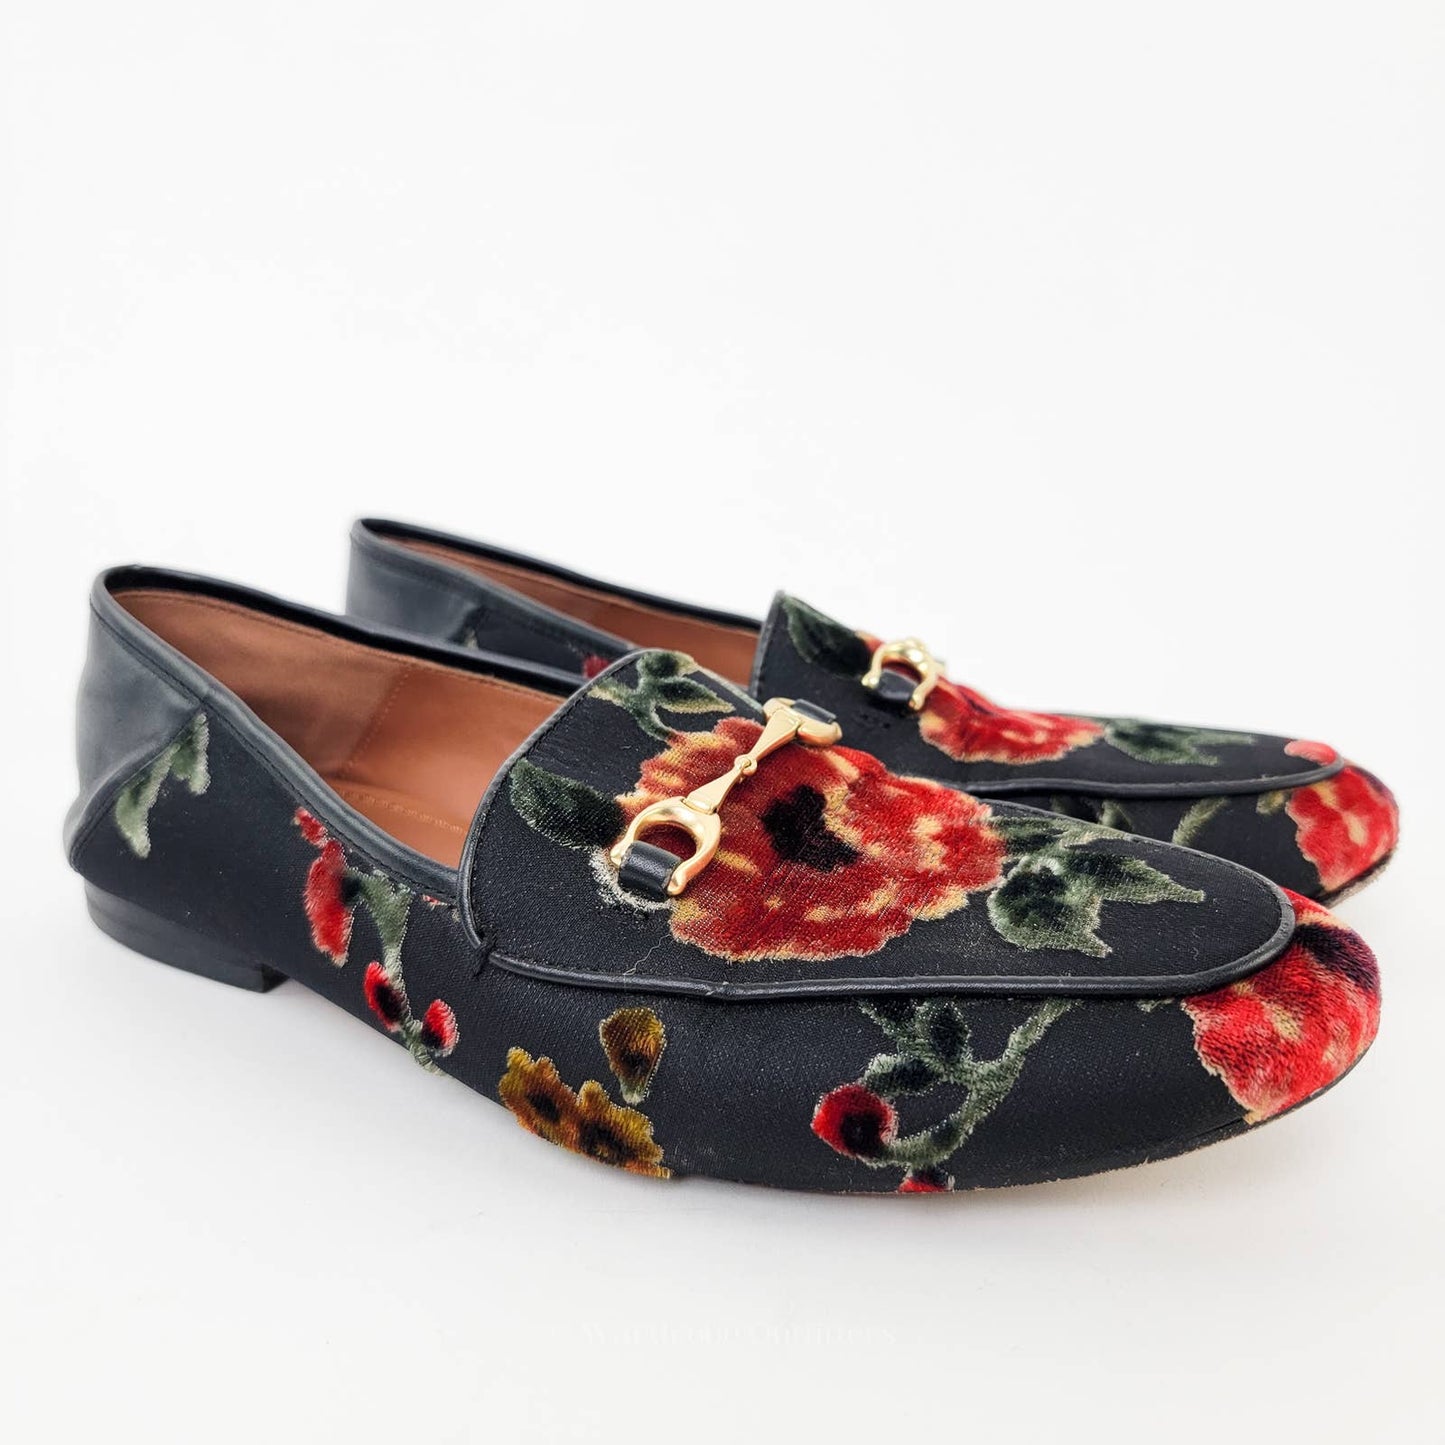 Coach Haley Floral Jacquard Slip On Loafers - 7.5